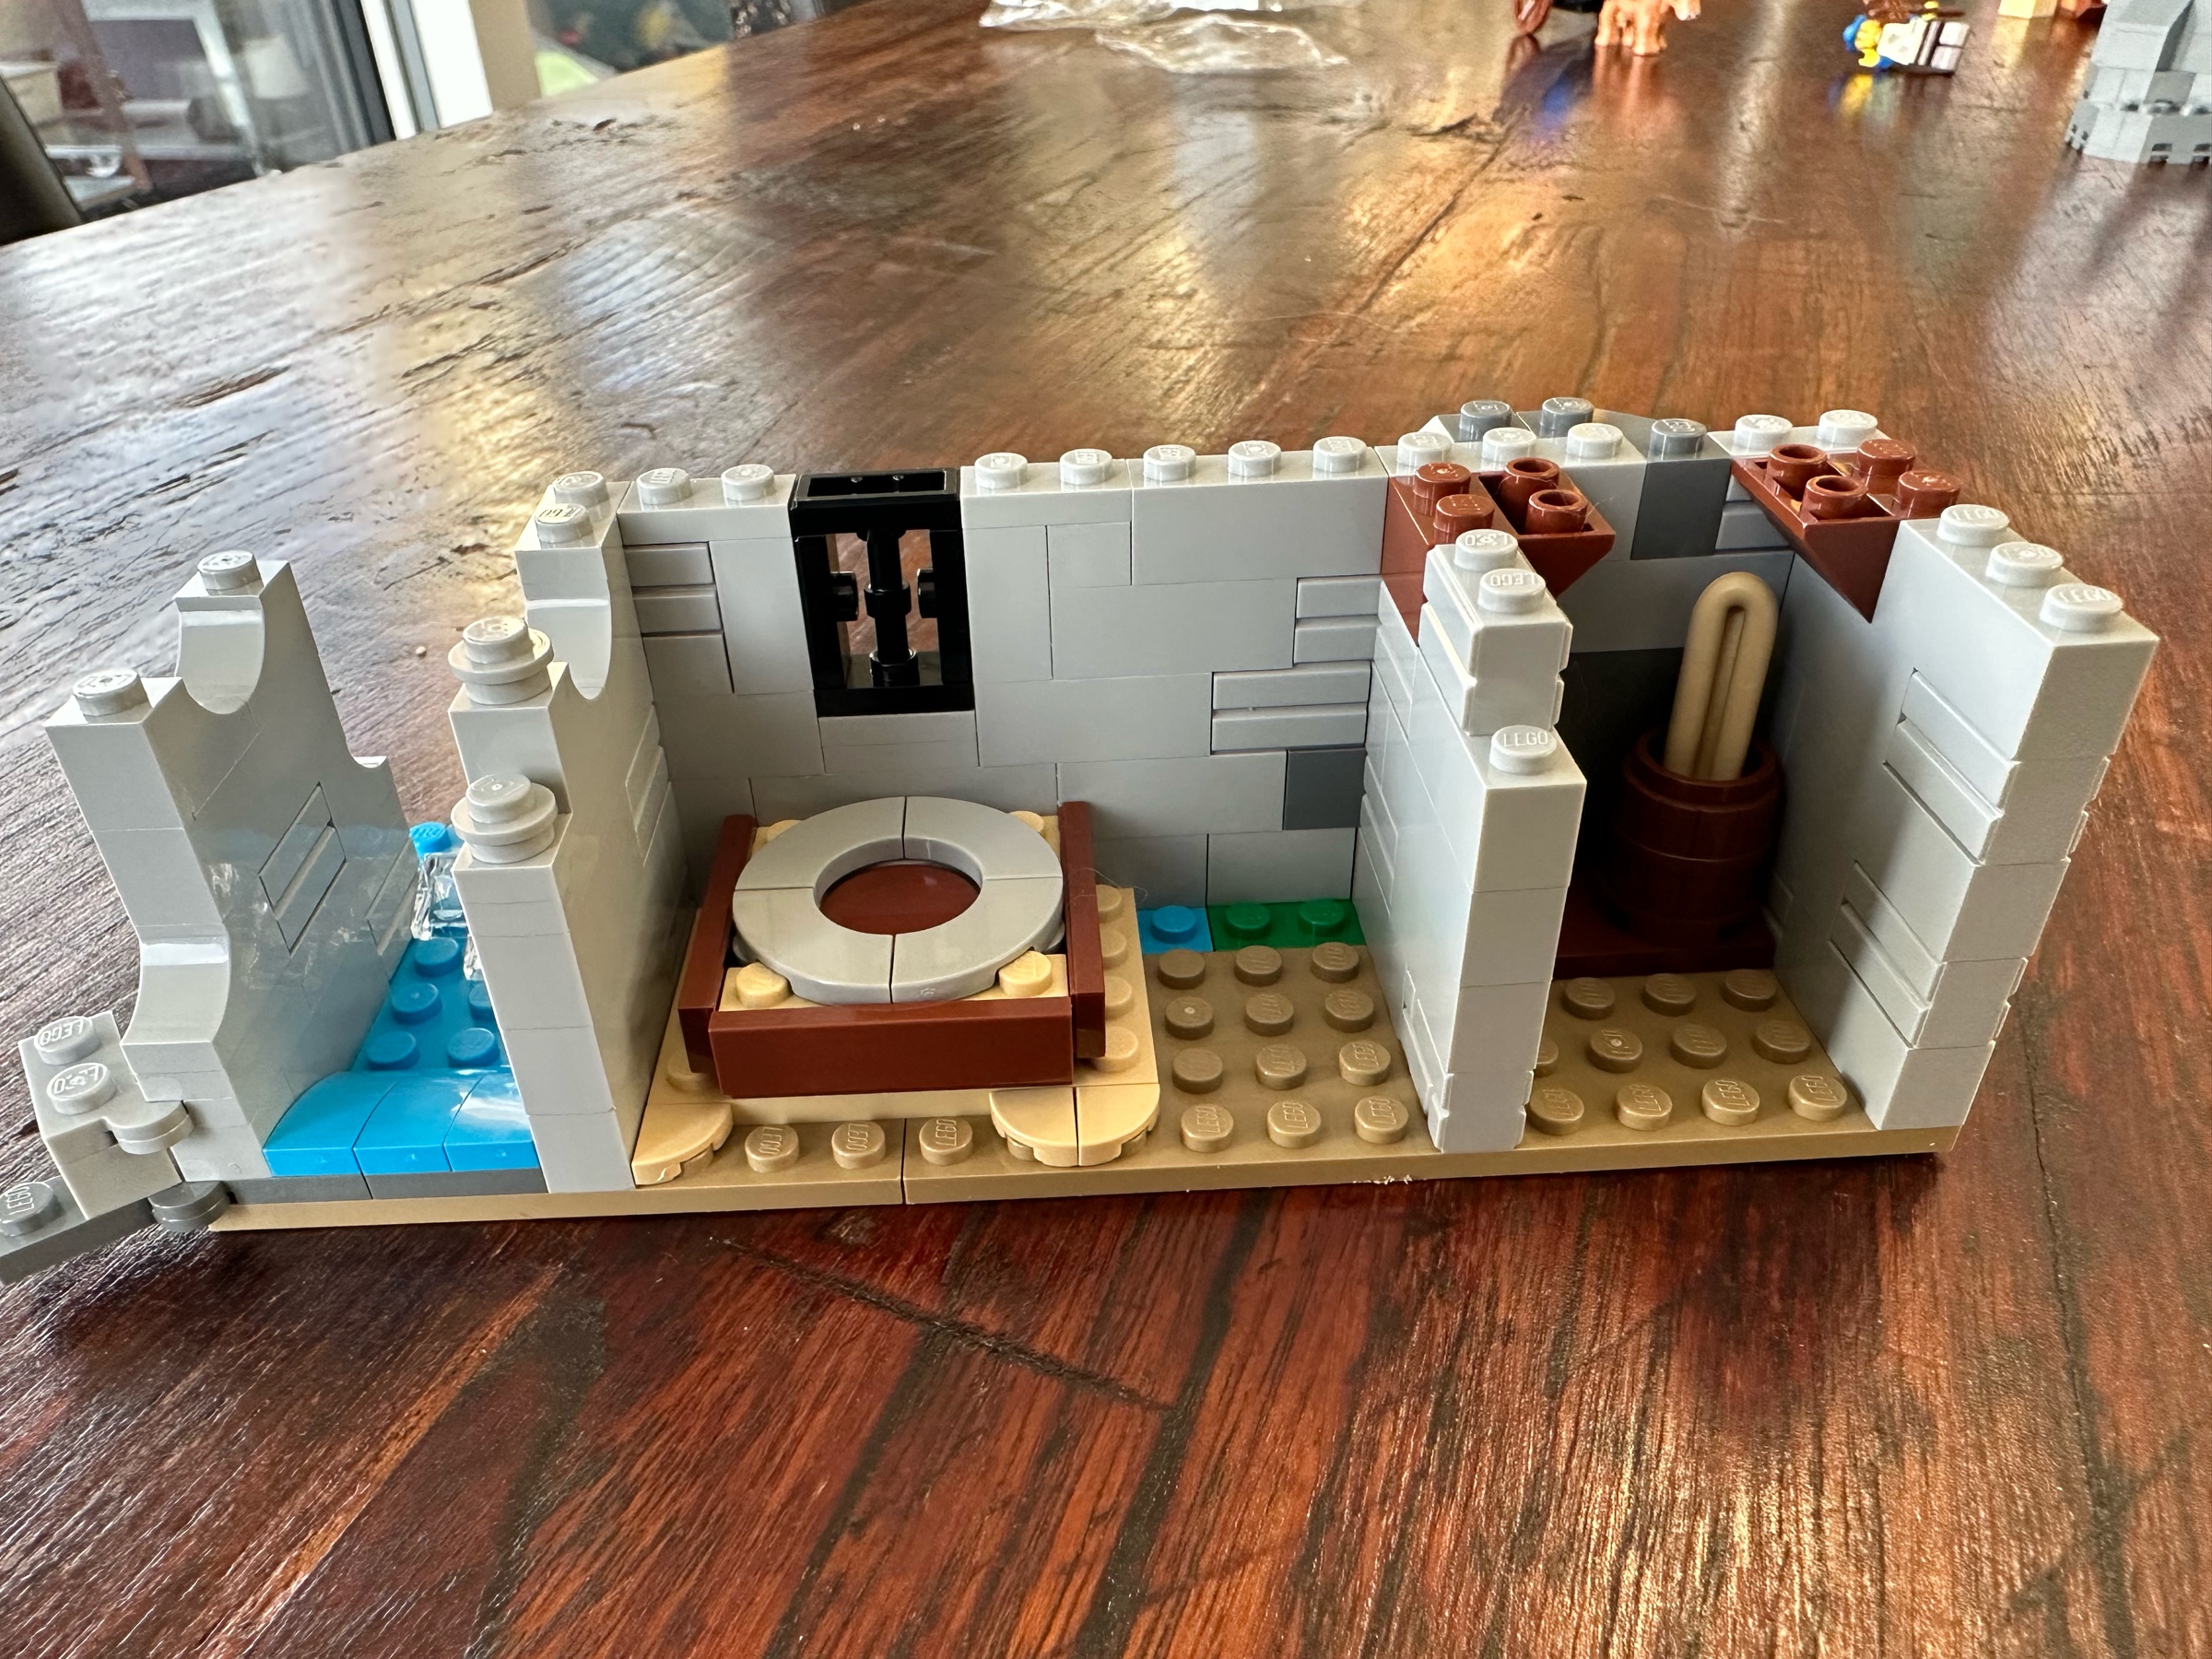 Interior view of LEGO castle section with a mill stone and a closet containing a barrel holding a baguette.